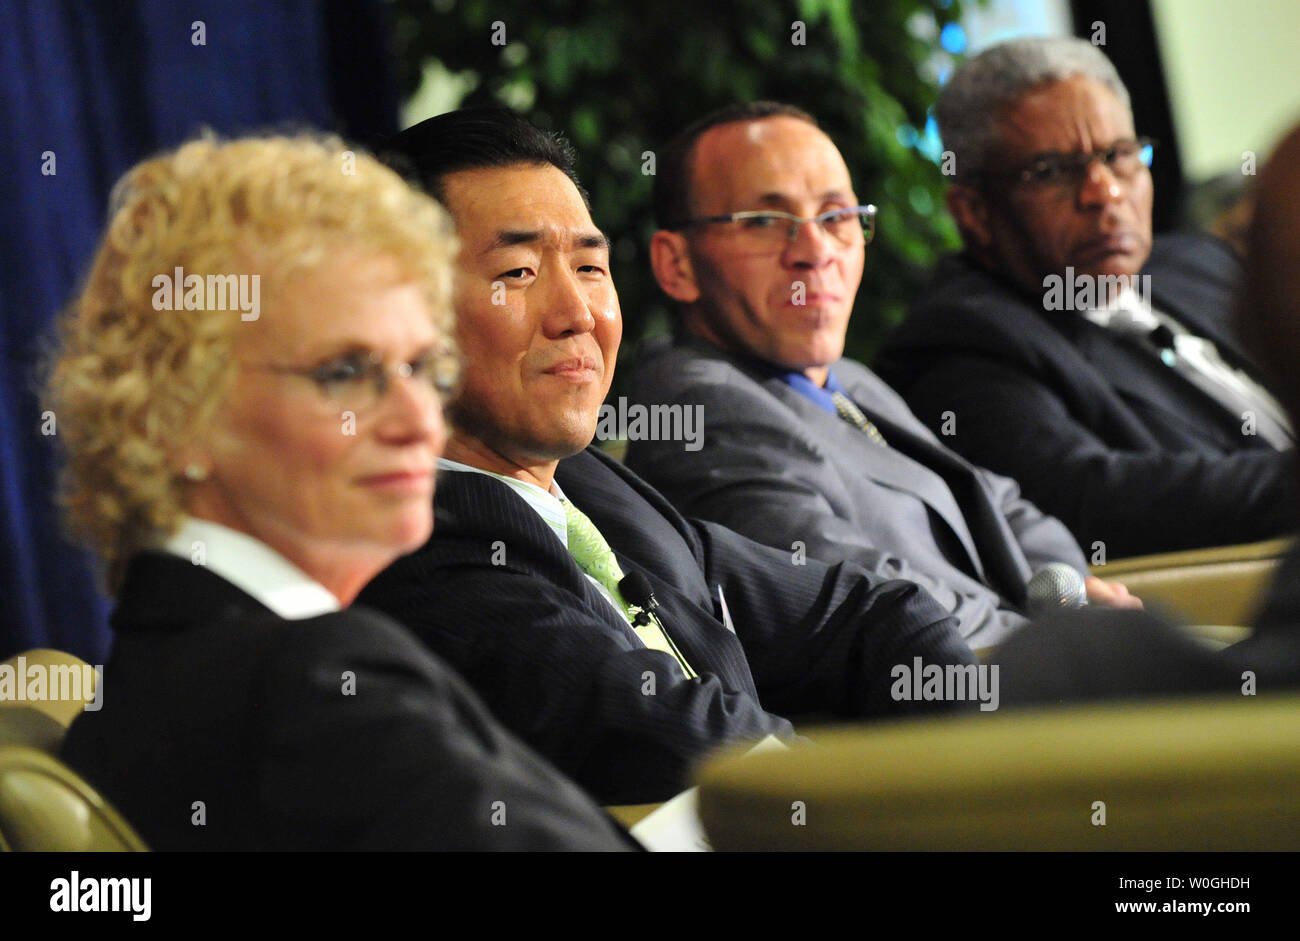 From left to right, Rev. Ruth Graham; Dr. Hyun Jin Moon, Founder and Chairman of the Global Peace Festival Foundation; Rev. Paul Murray, President of the Vision Ministries International; and Rev. E. W. Lee, Senior Pastor at Shiloh Baptist Church, McDonough, Georgia, participates in a forum discussion on faith leadership for American renewal at the National Faith Leaders Summit in Crystal City, Virginia on October 12, 2011.   UPI/Kevin Dietsch Stock Photo